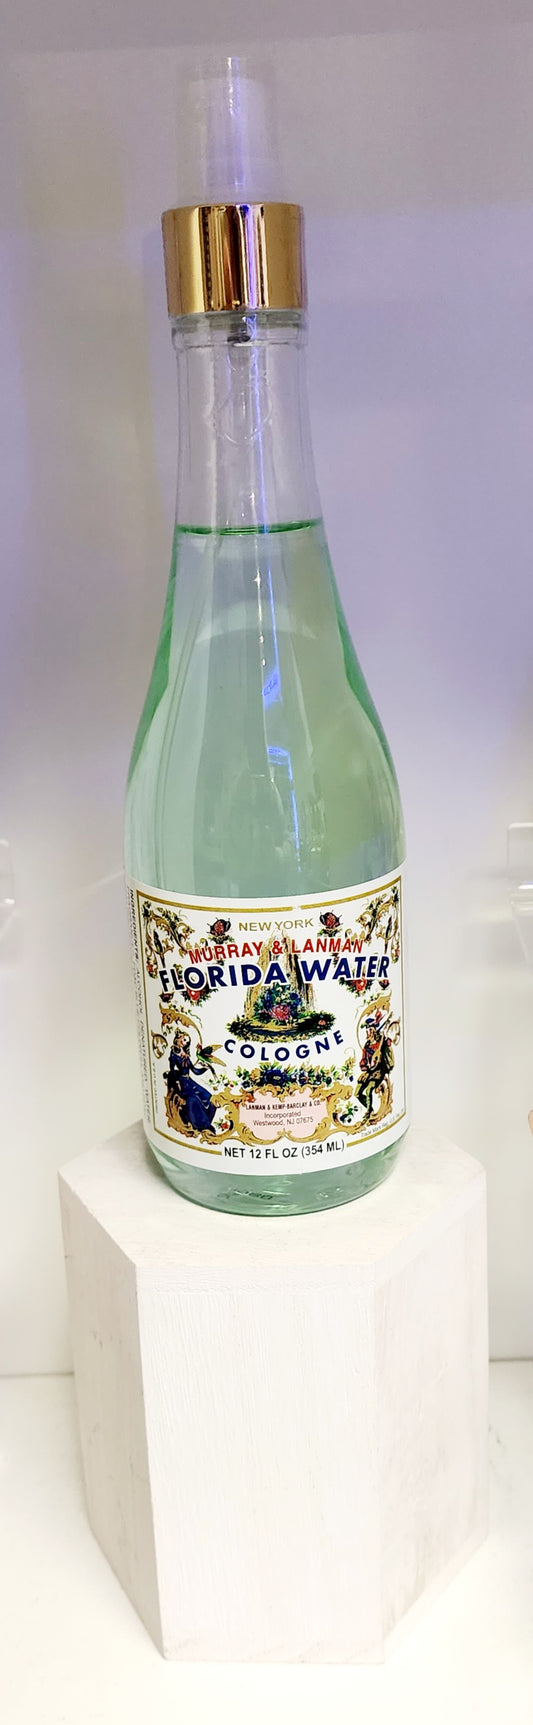 Limited Edition Florida water bottle Cologne Spray (12 FL oz)